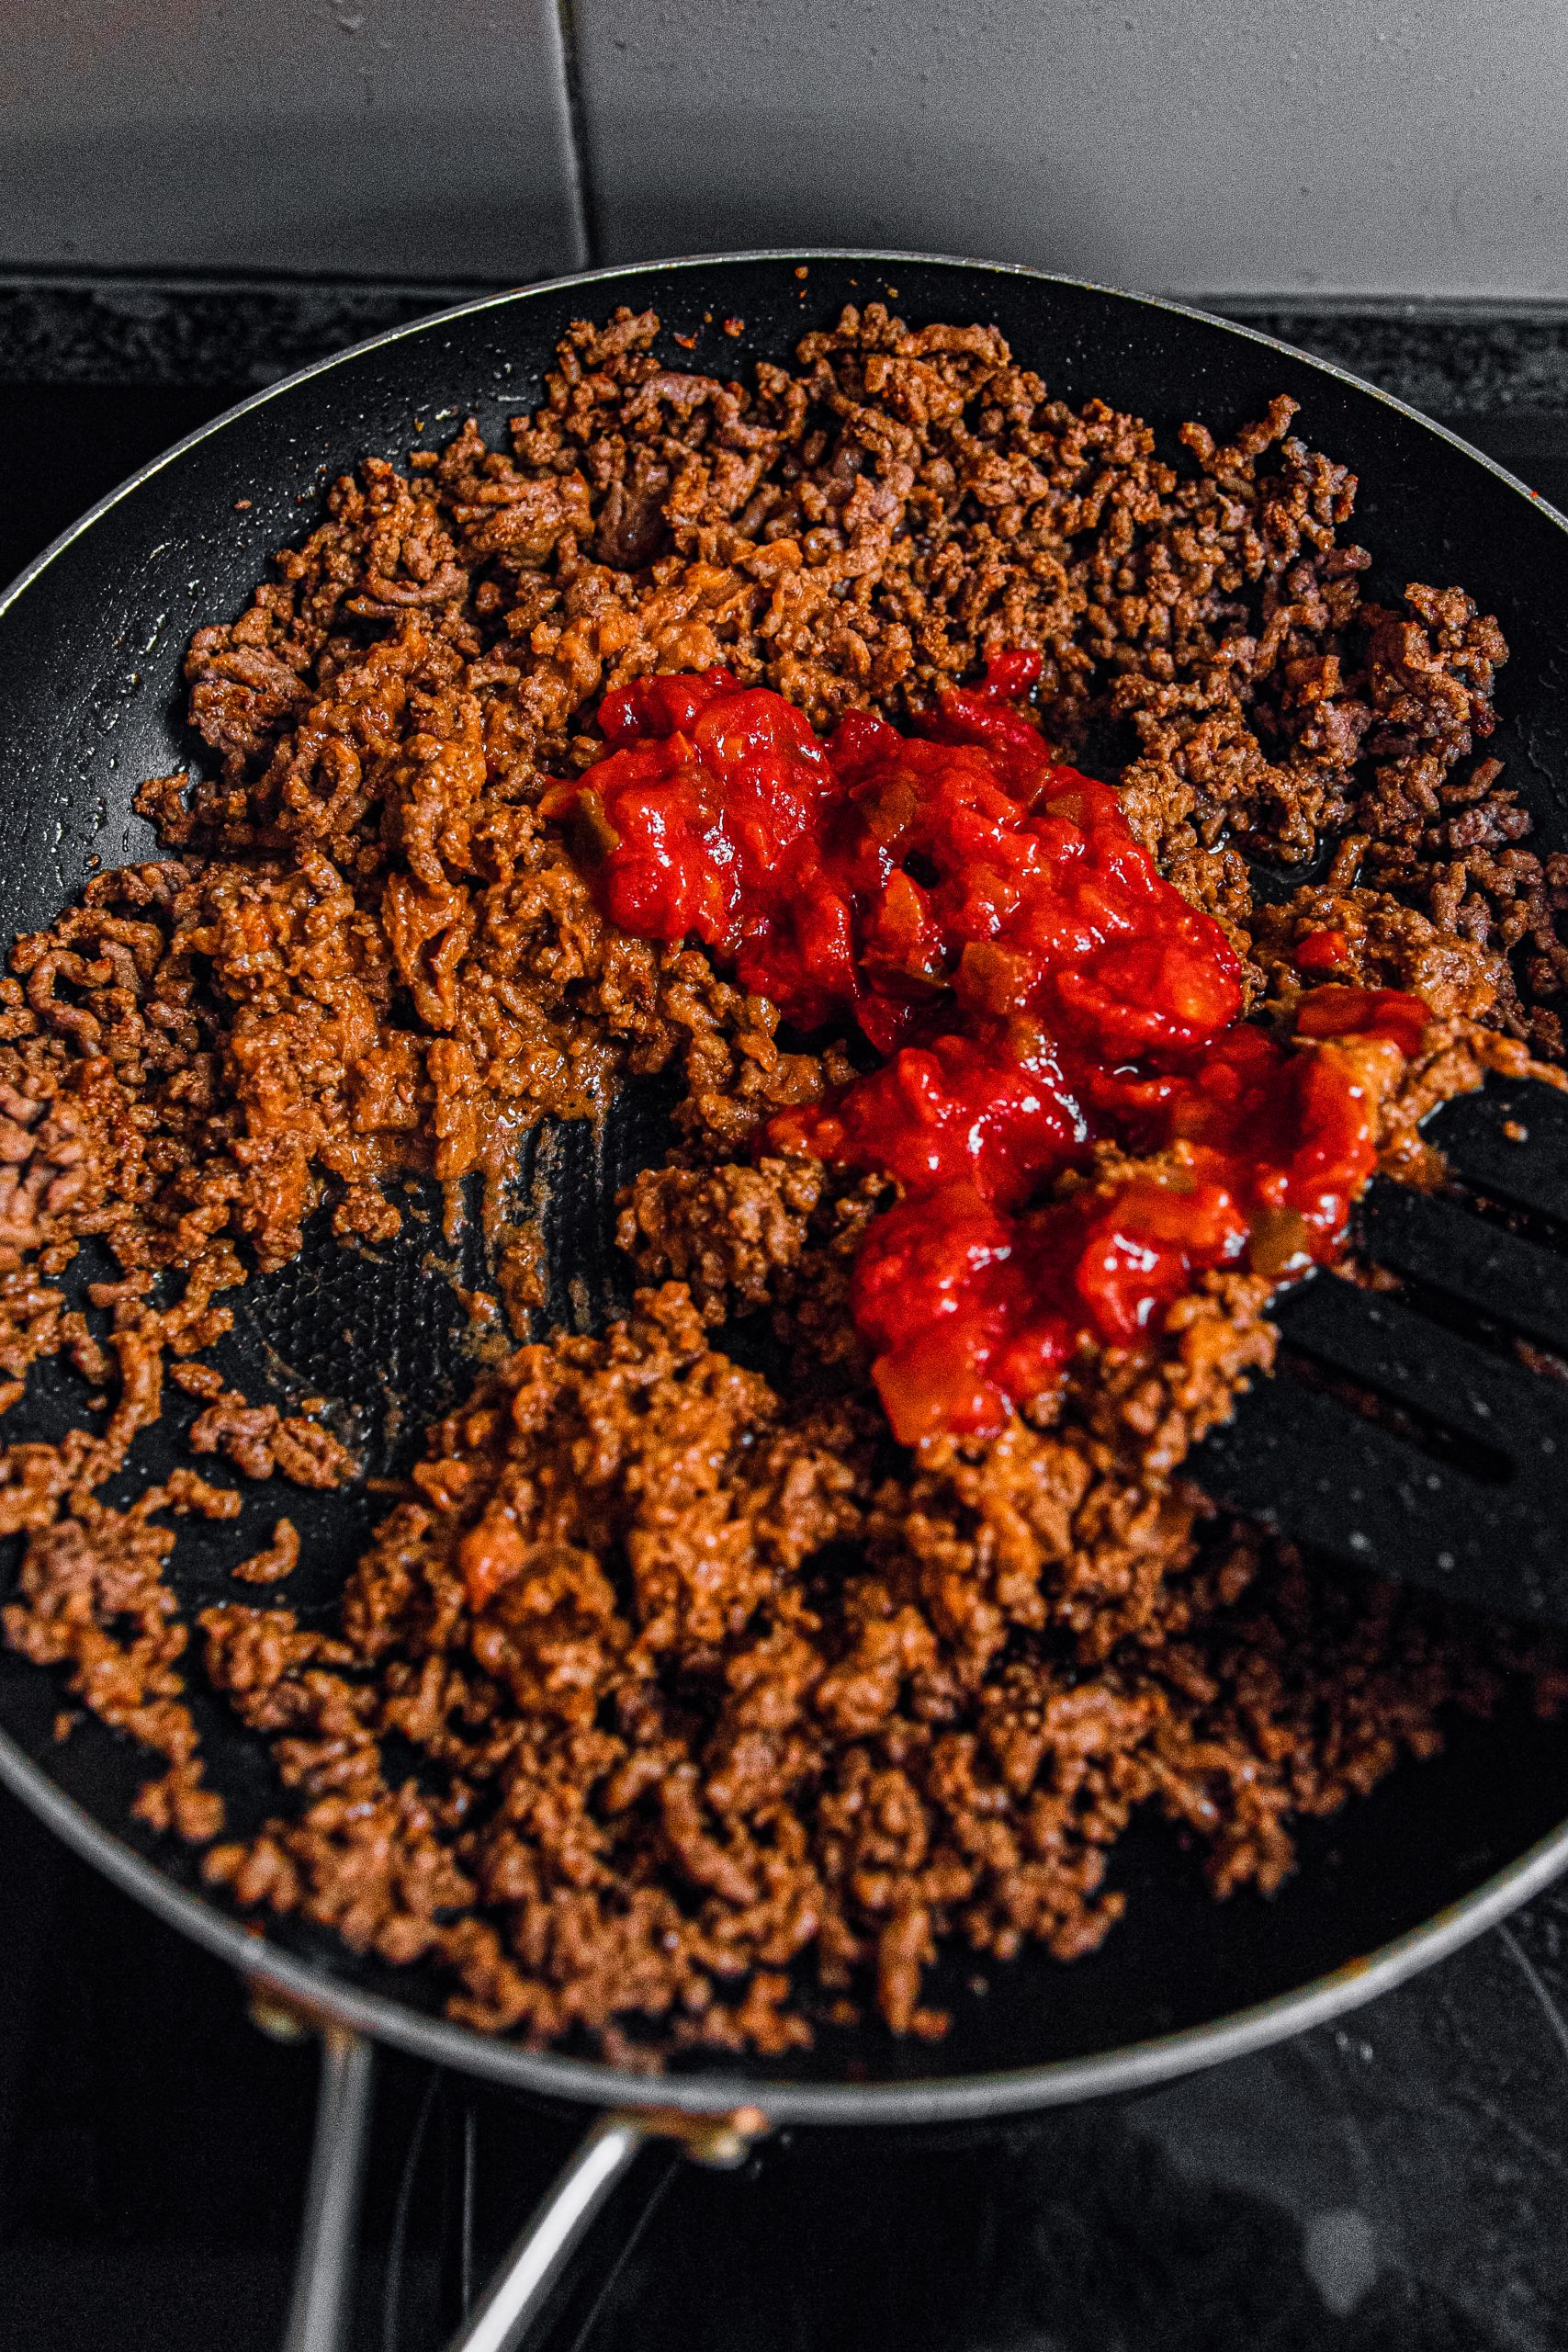 Remove any excess fat then mix in taco seasoning, salsa, and refried beans.